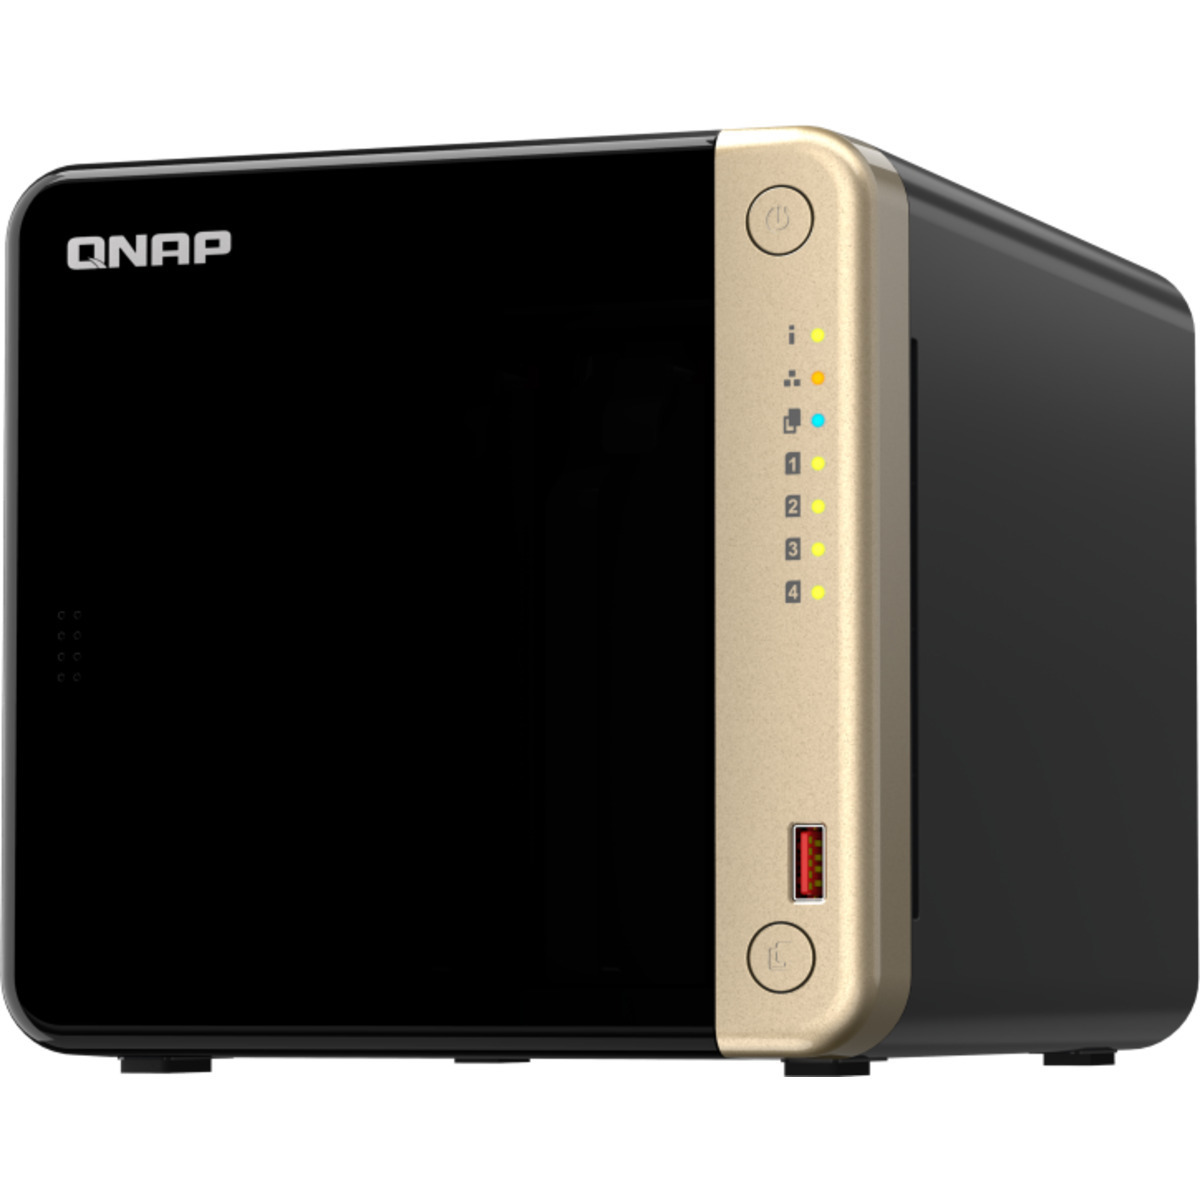 QNAP TS-464 48tb 4-Bay Desktop Multimedia / Power User / Business NAS - Network Attached Storage Device 4x12tb Seagate IronWolf Pro ST12000NT001 3.5 7200rpm SATA 6Gb/s HDD NAS Class Drives Installed - Burn-In Tested - ON SALE TS-464